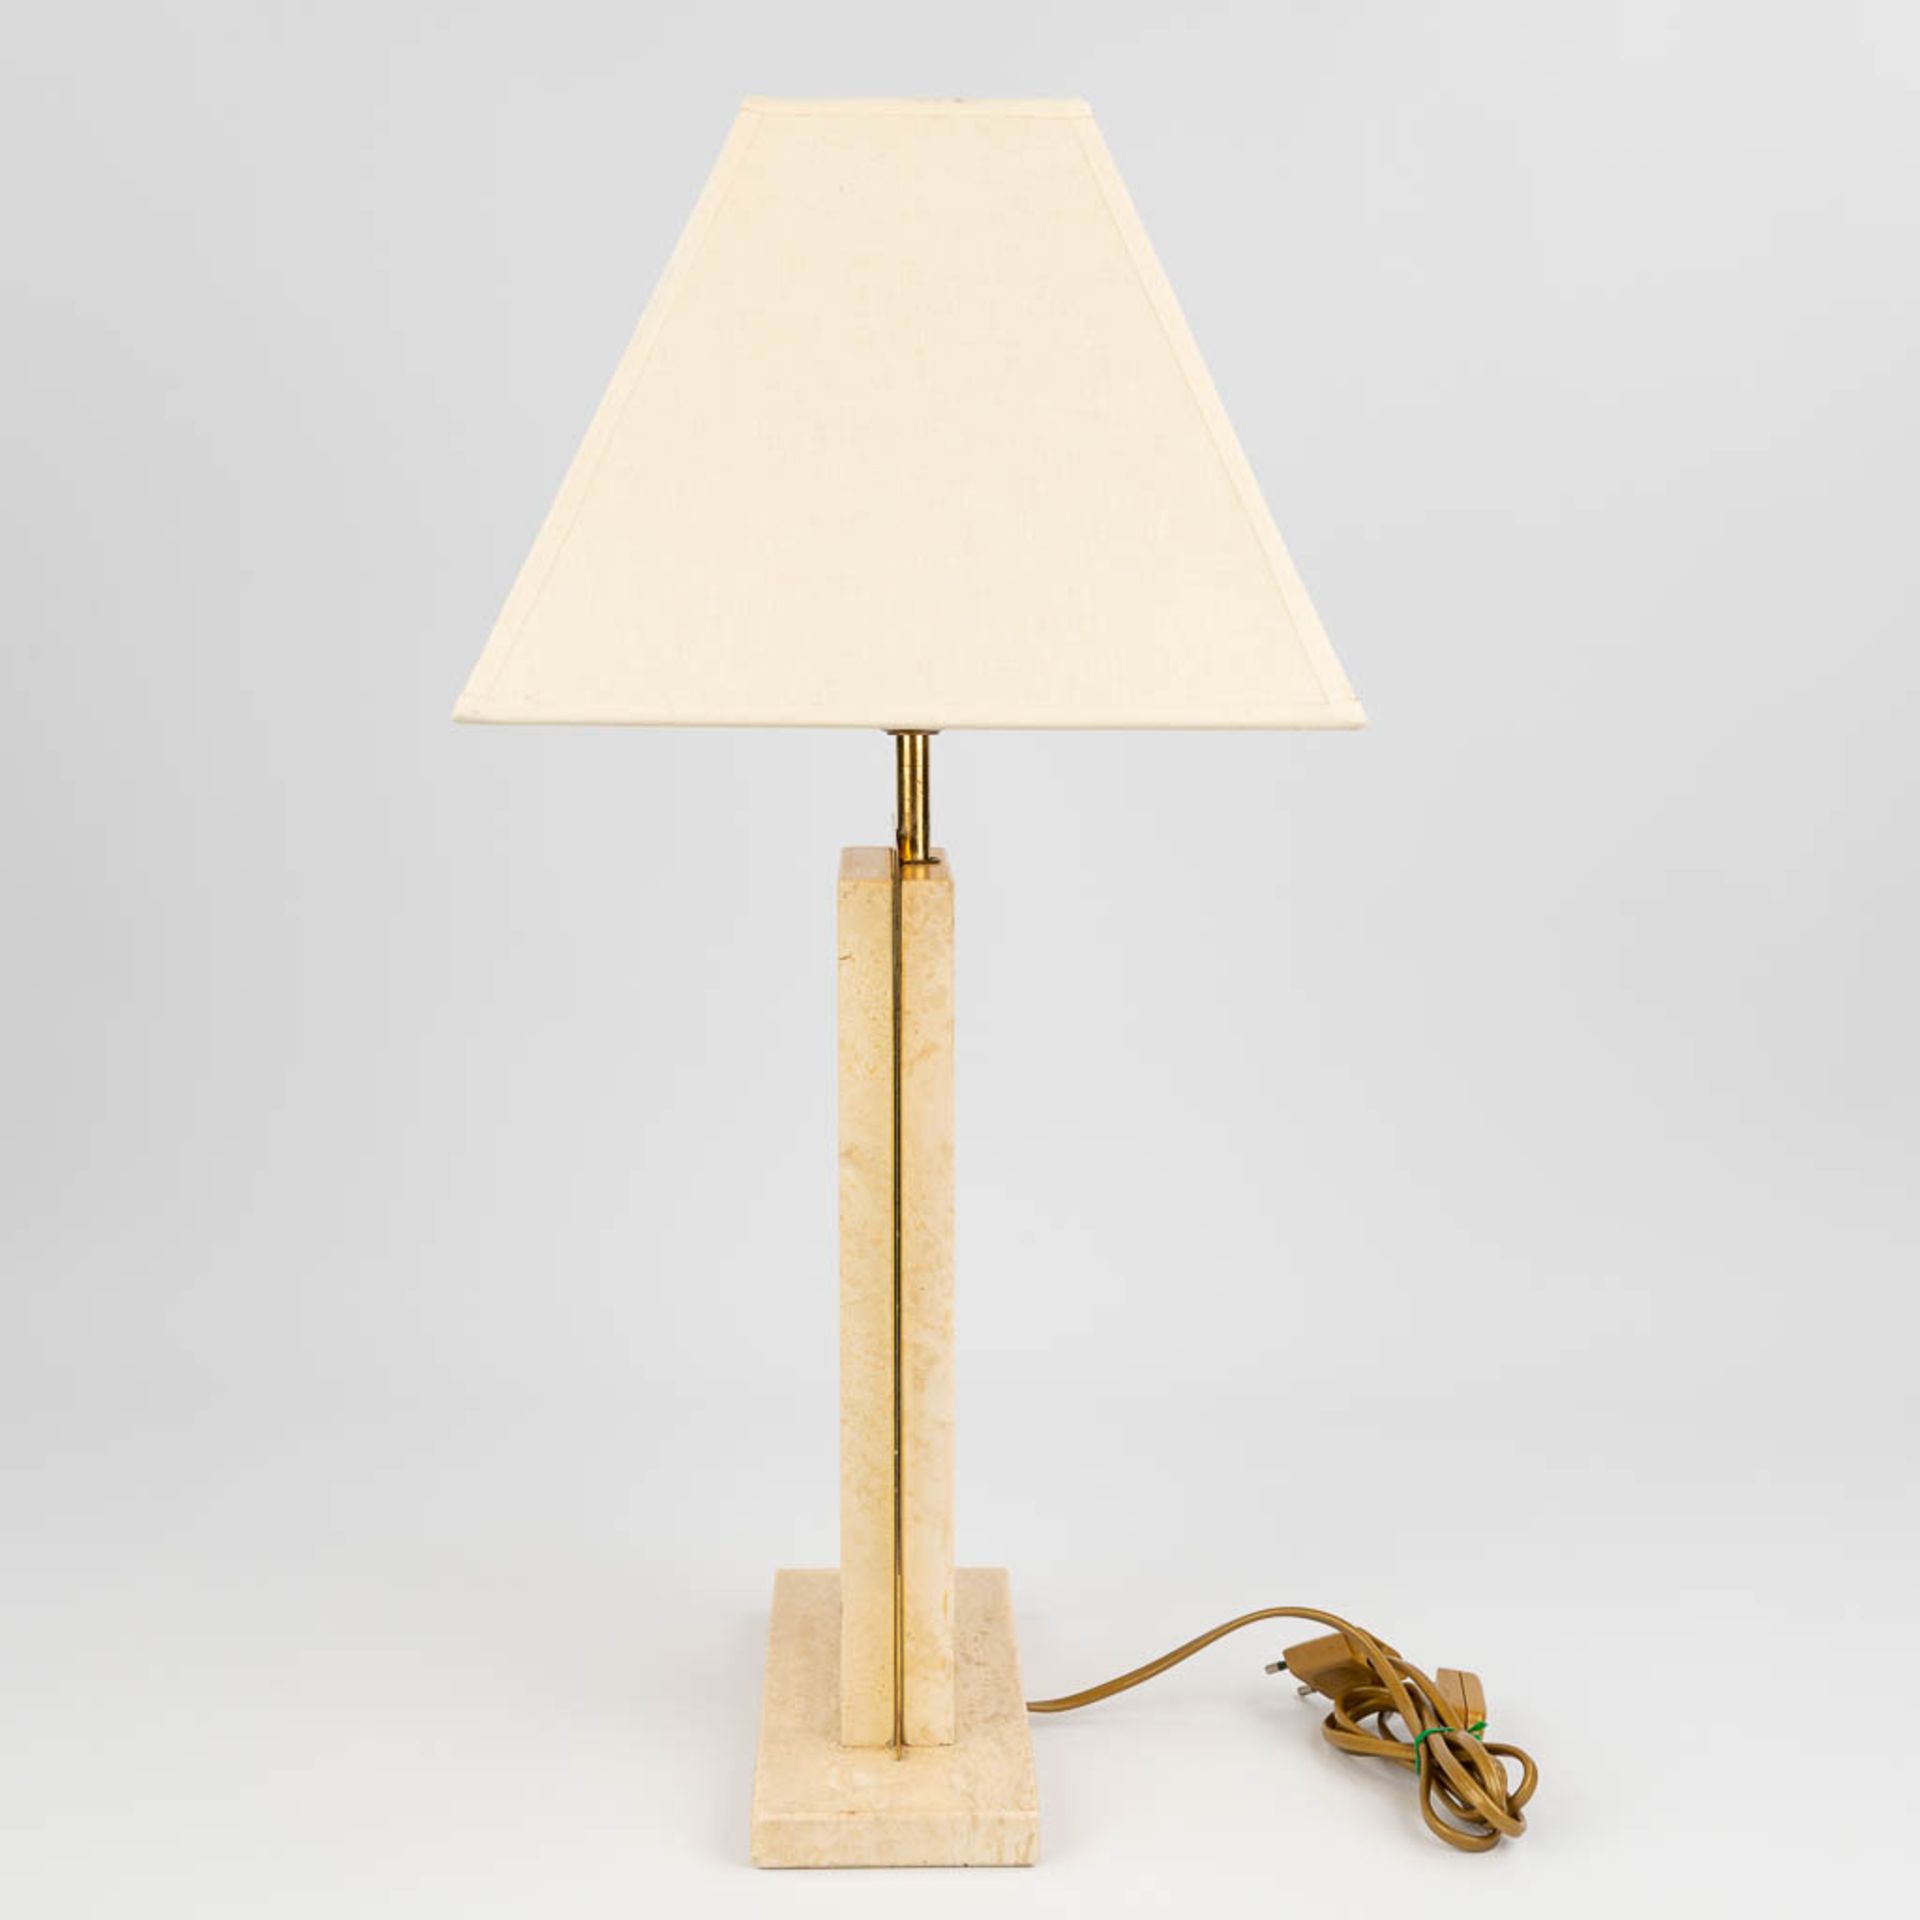 Camille BREESCHE (XX) a travertine table lamp with gold-plated metal parts. (10 x 26 x 44cm) - Bild 4 aus 11